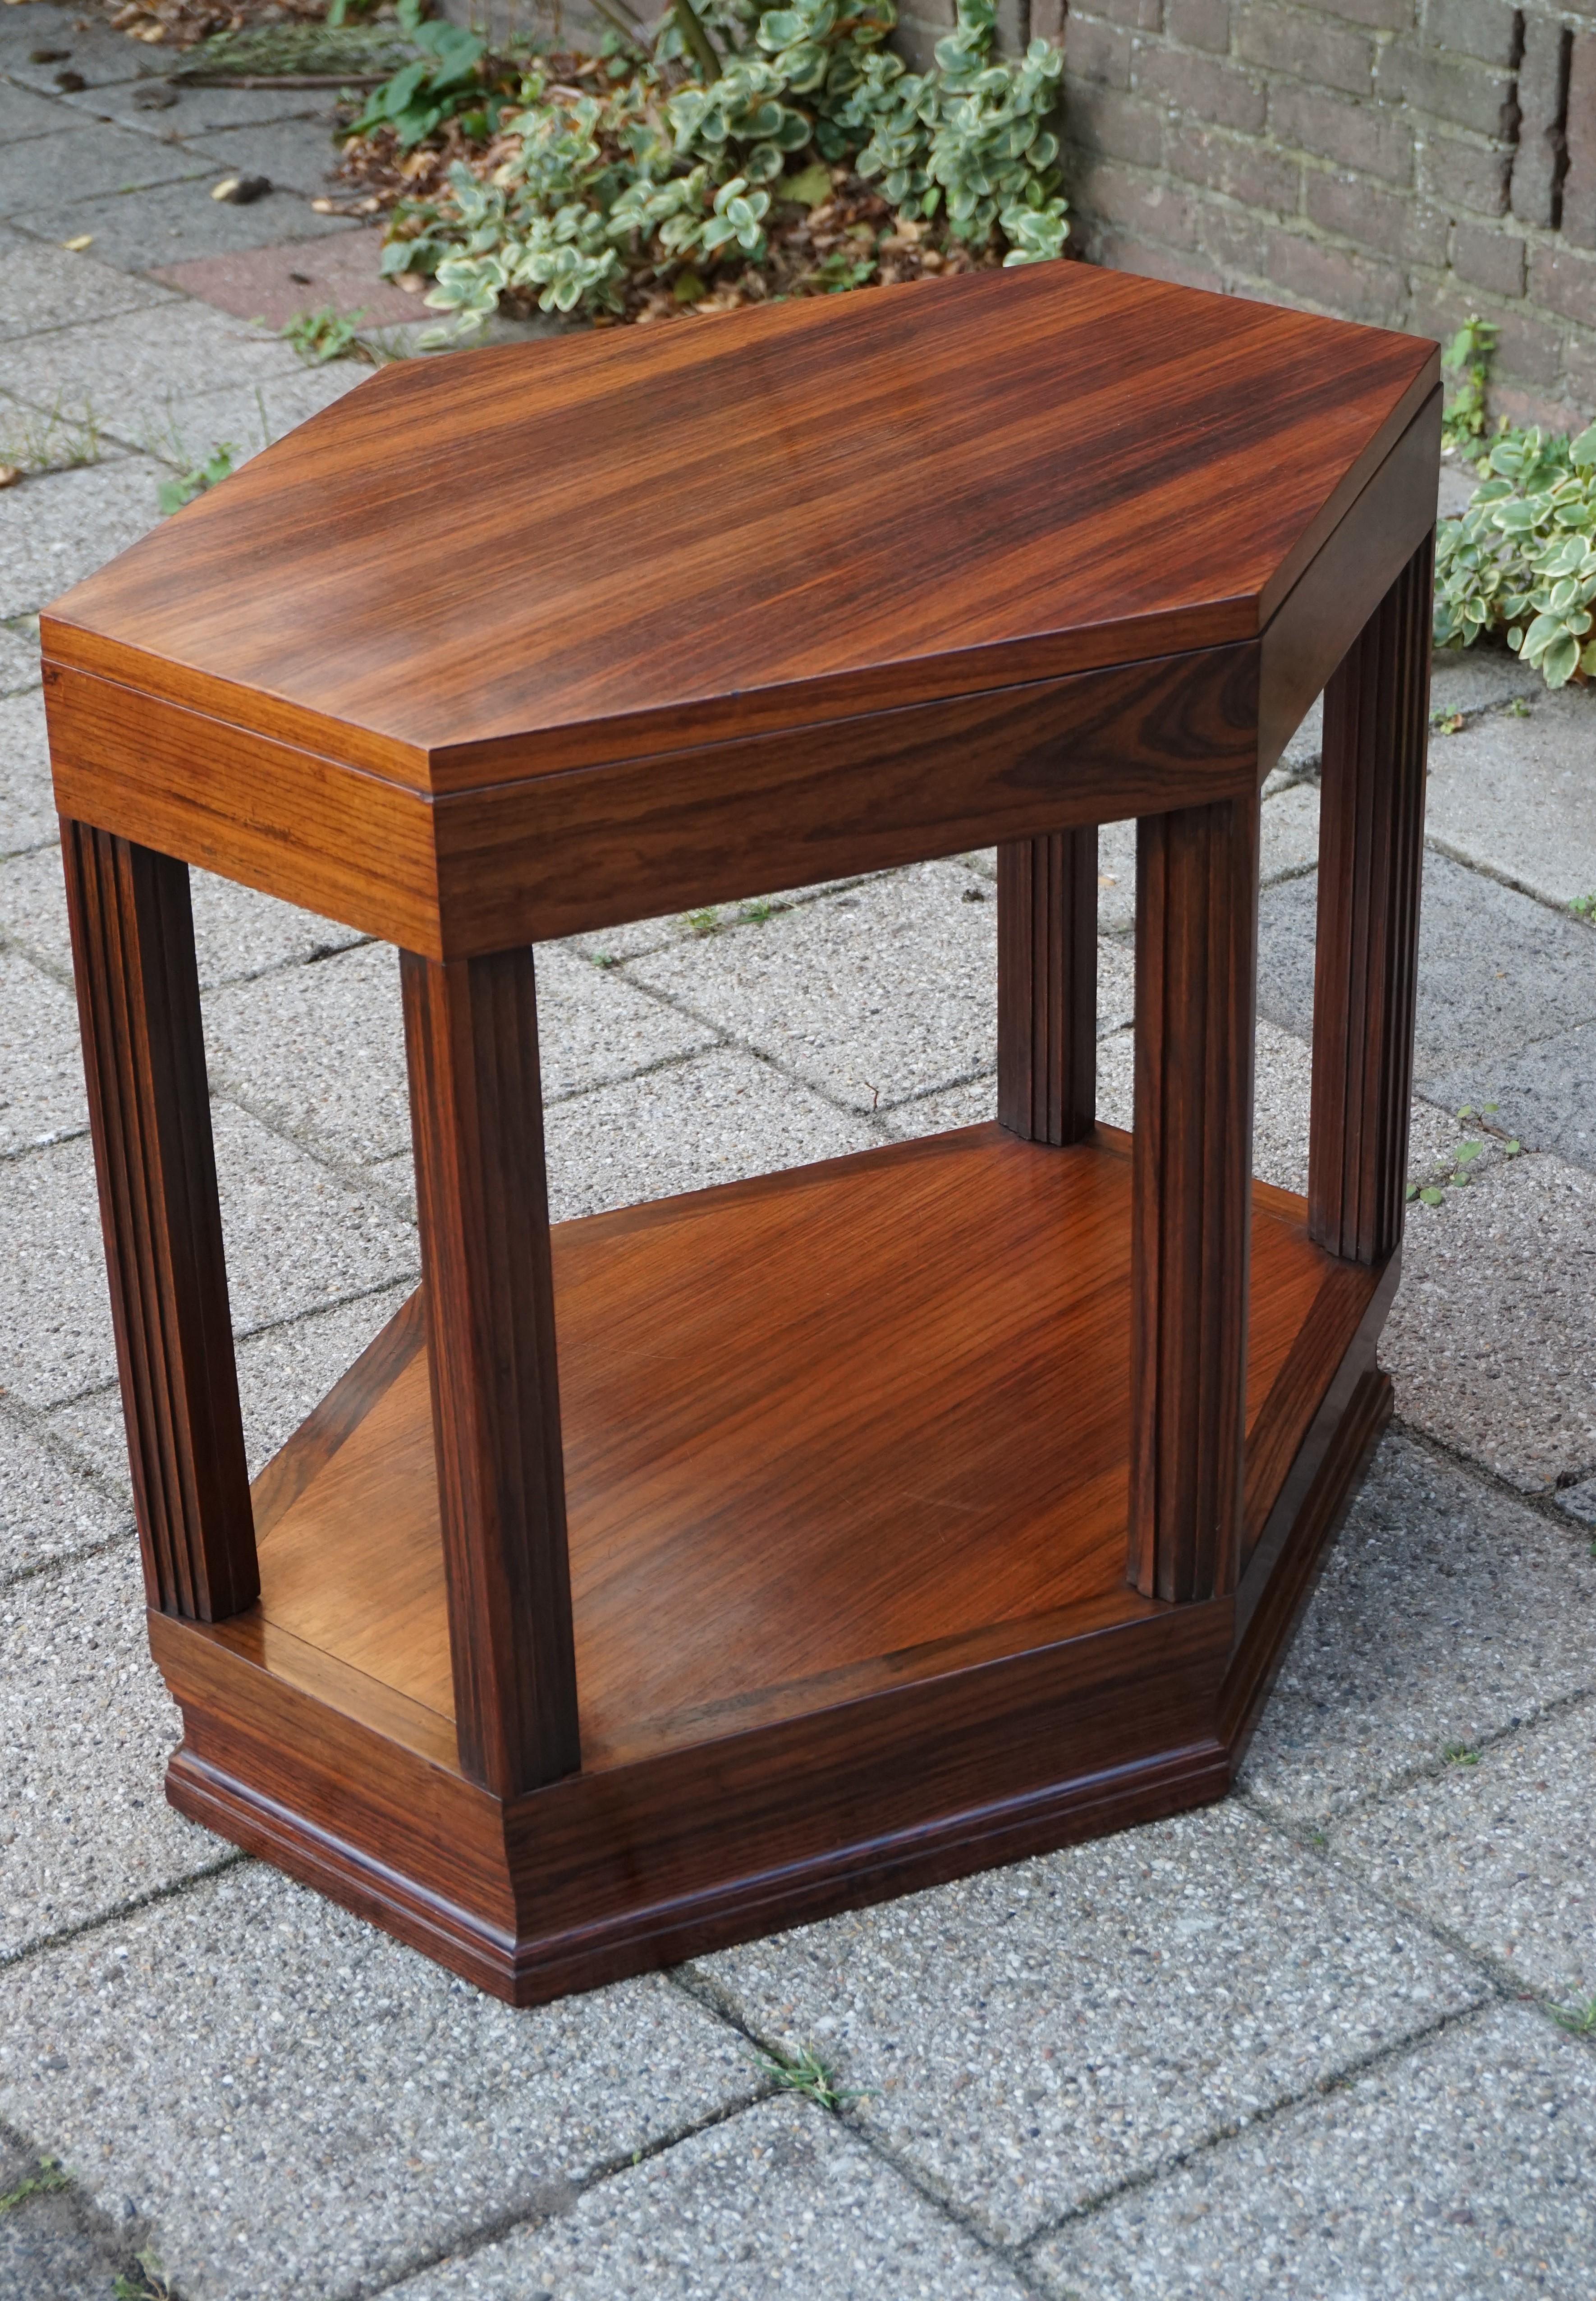 Stunning and Excellent Condition Coromandel Art Deco Coffee or Sofa Table 1920 For Sale 7